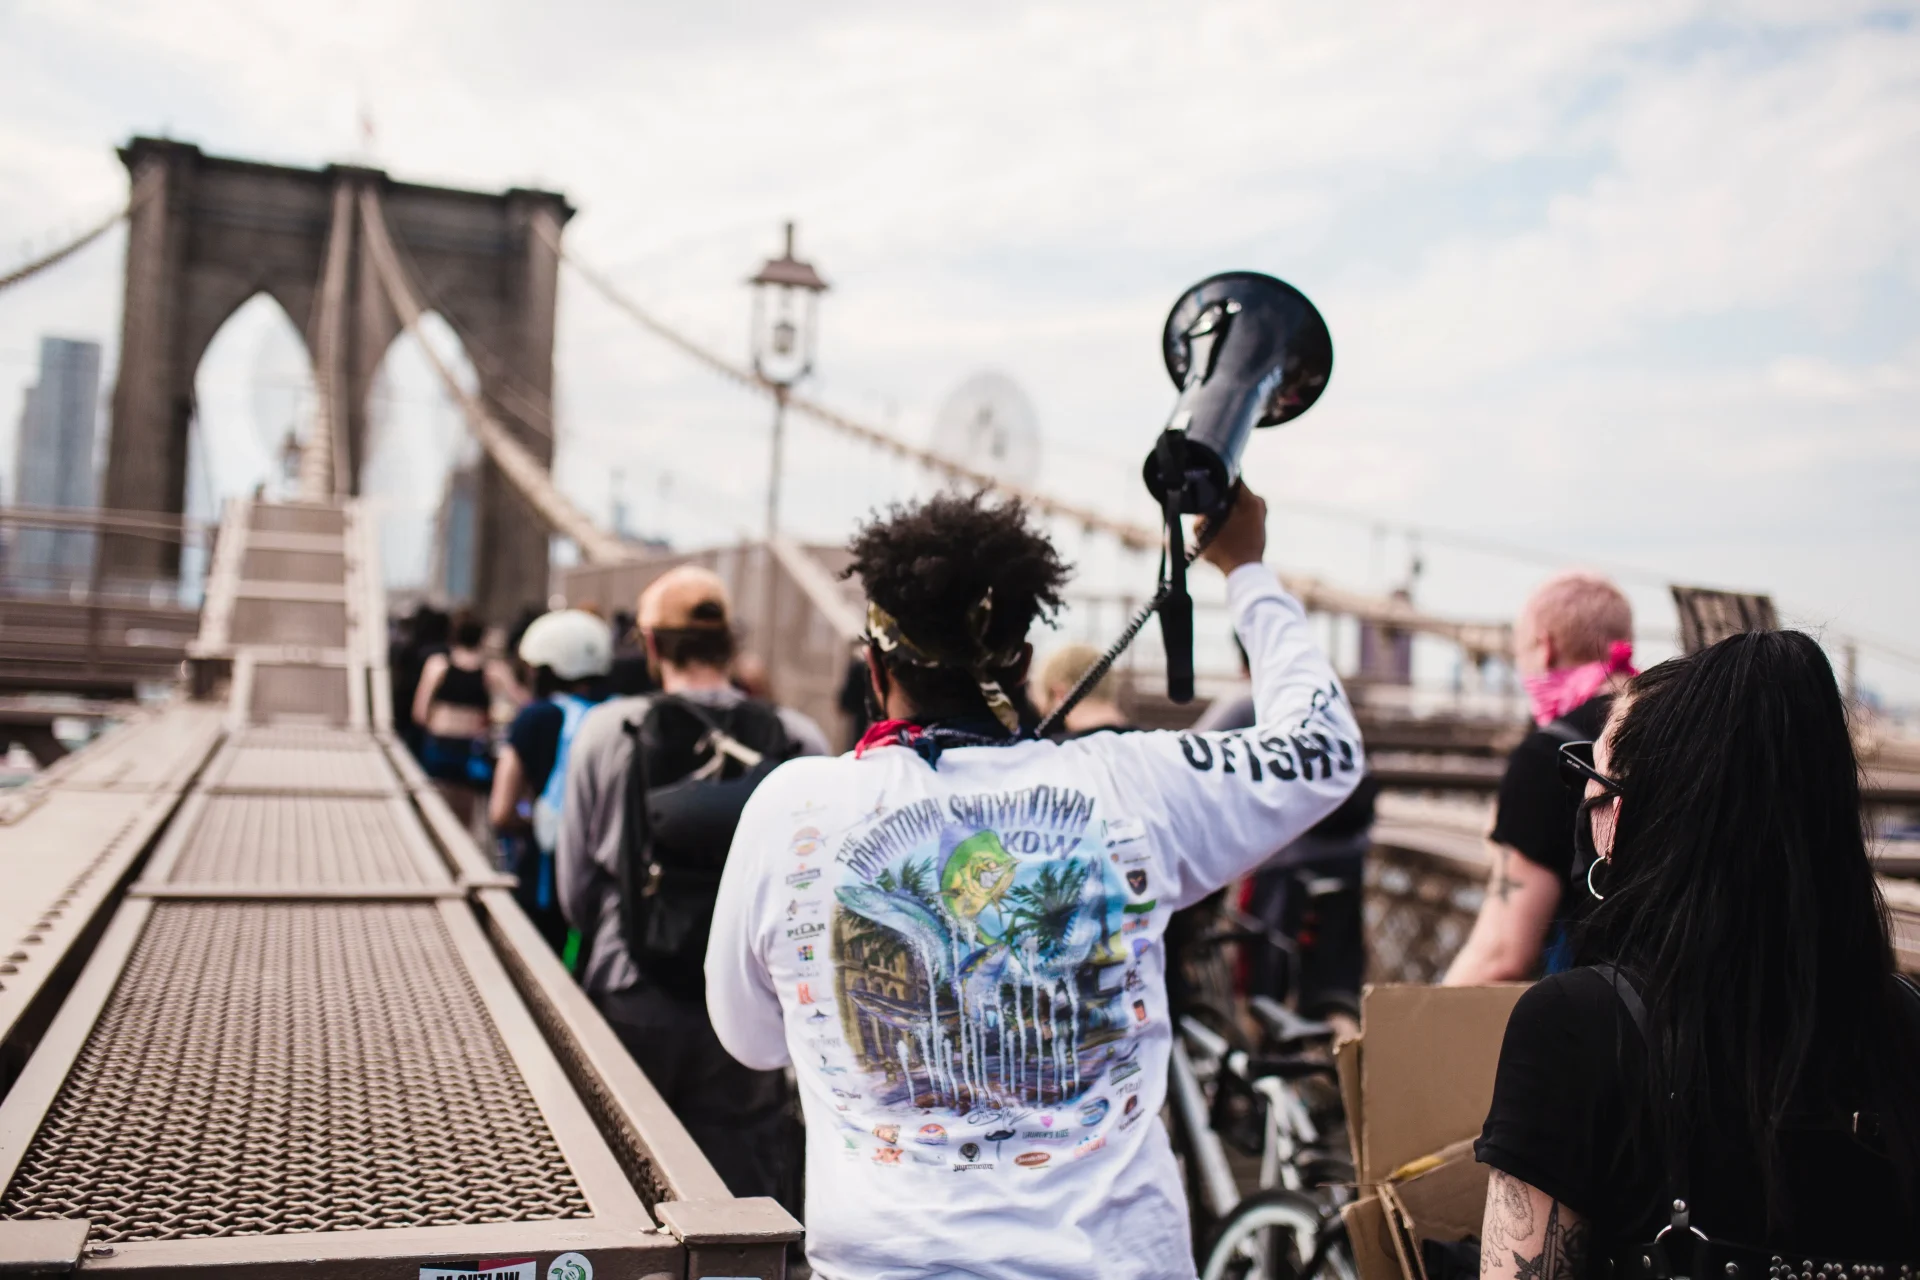 People marching across a bridge with signs and a megaphone in hand, relating to an article about sustained activism.